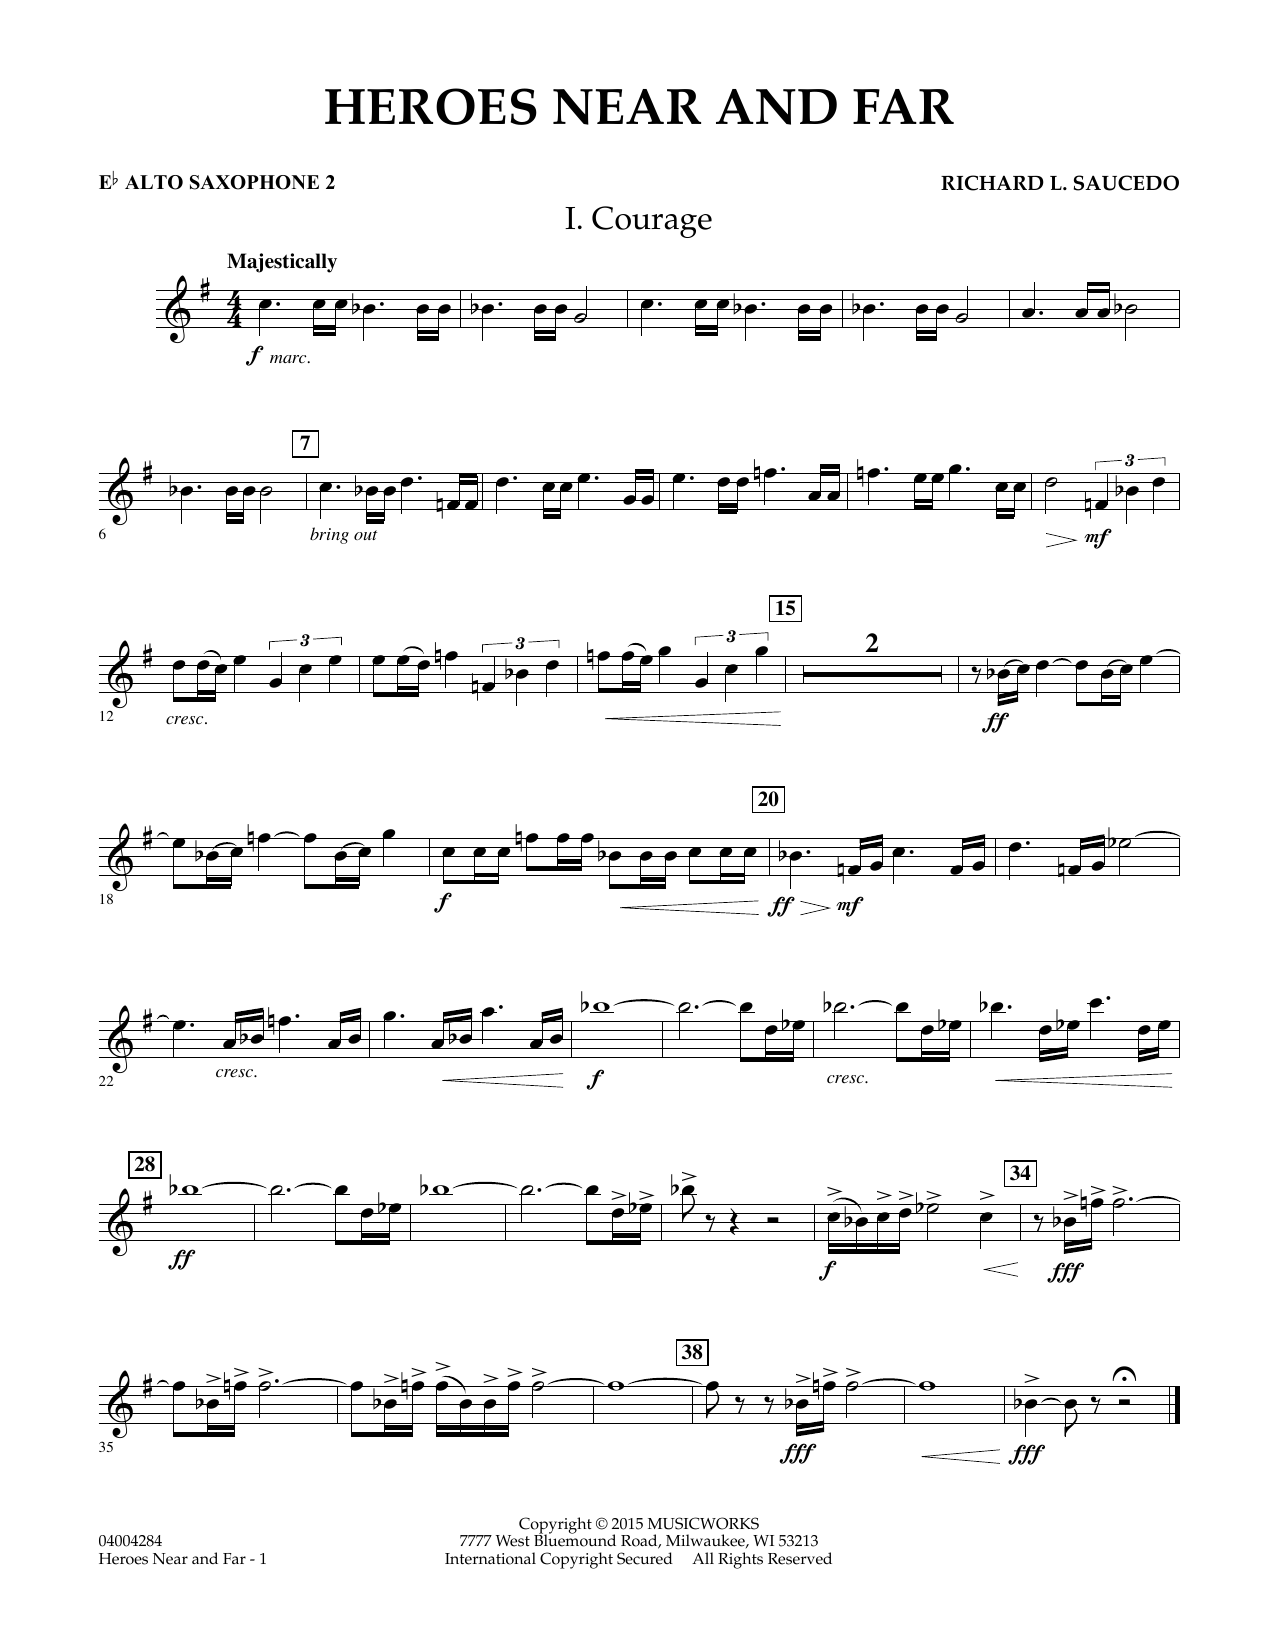 Richard L. Saucedo Heroes Near and Far - Eb Alto Saxophone 2 sheet music notes and chords. Download Printable PDF.